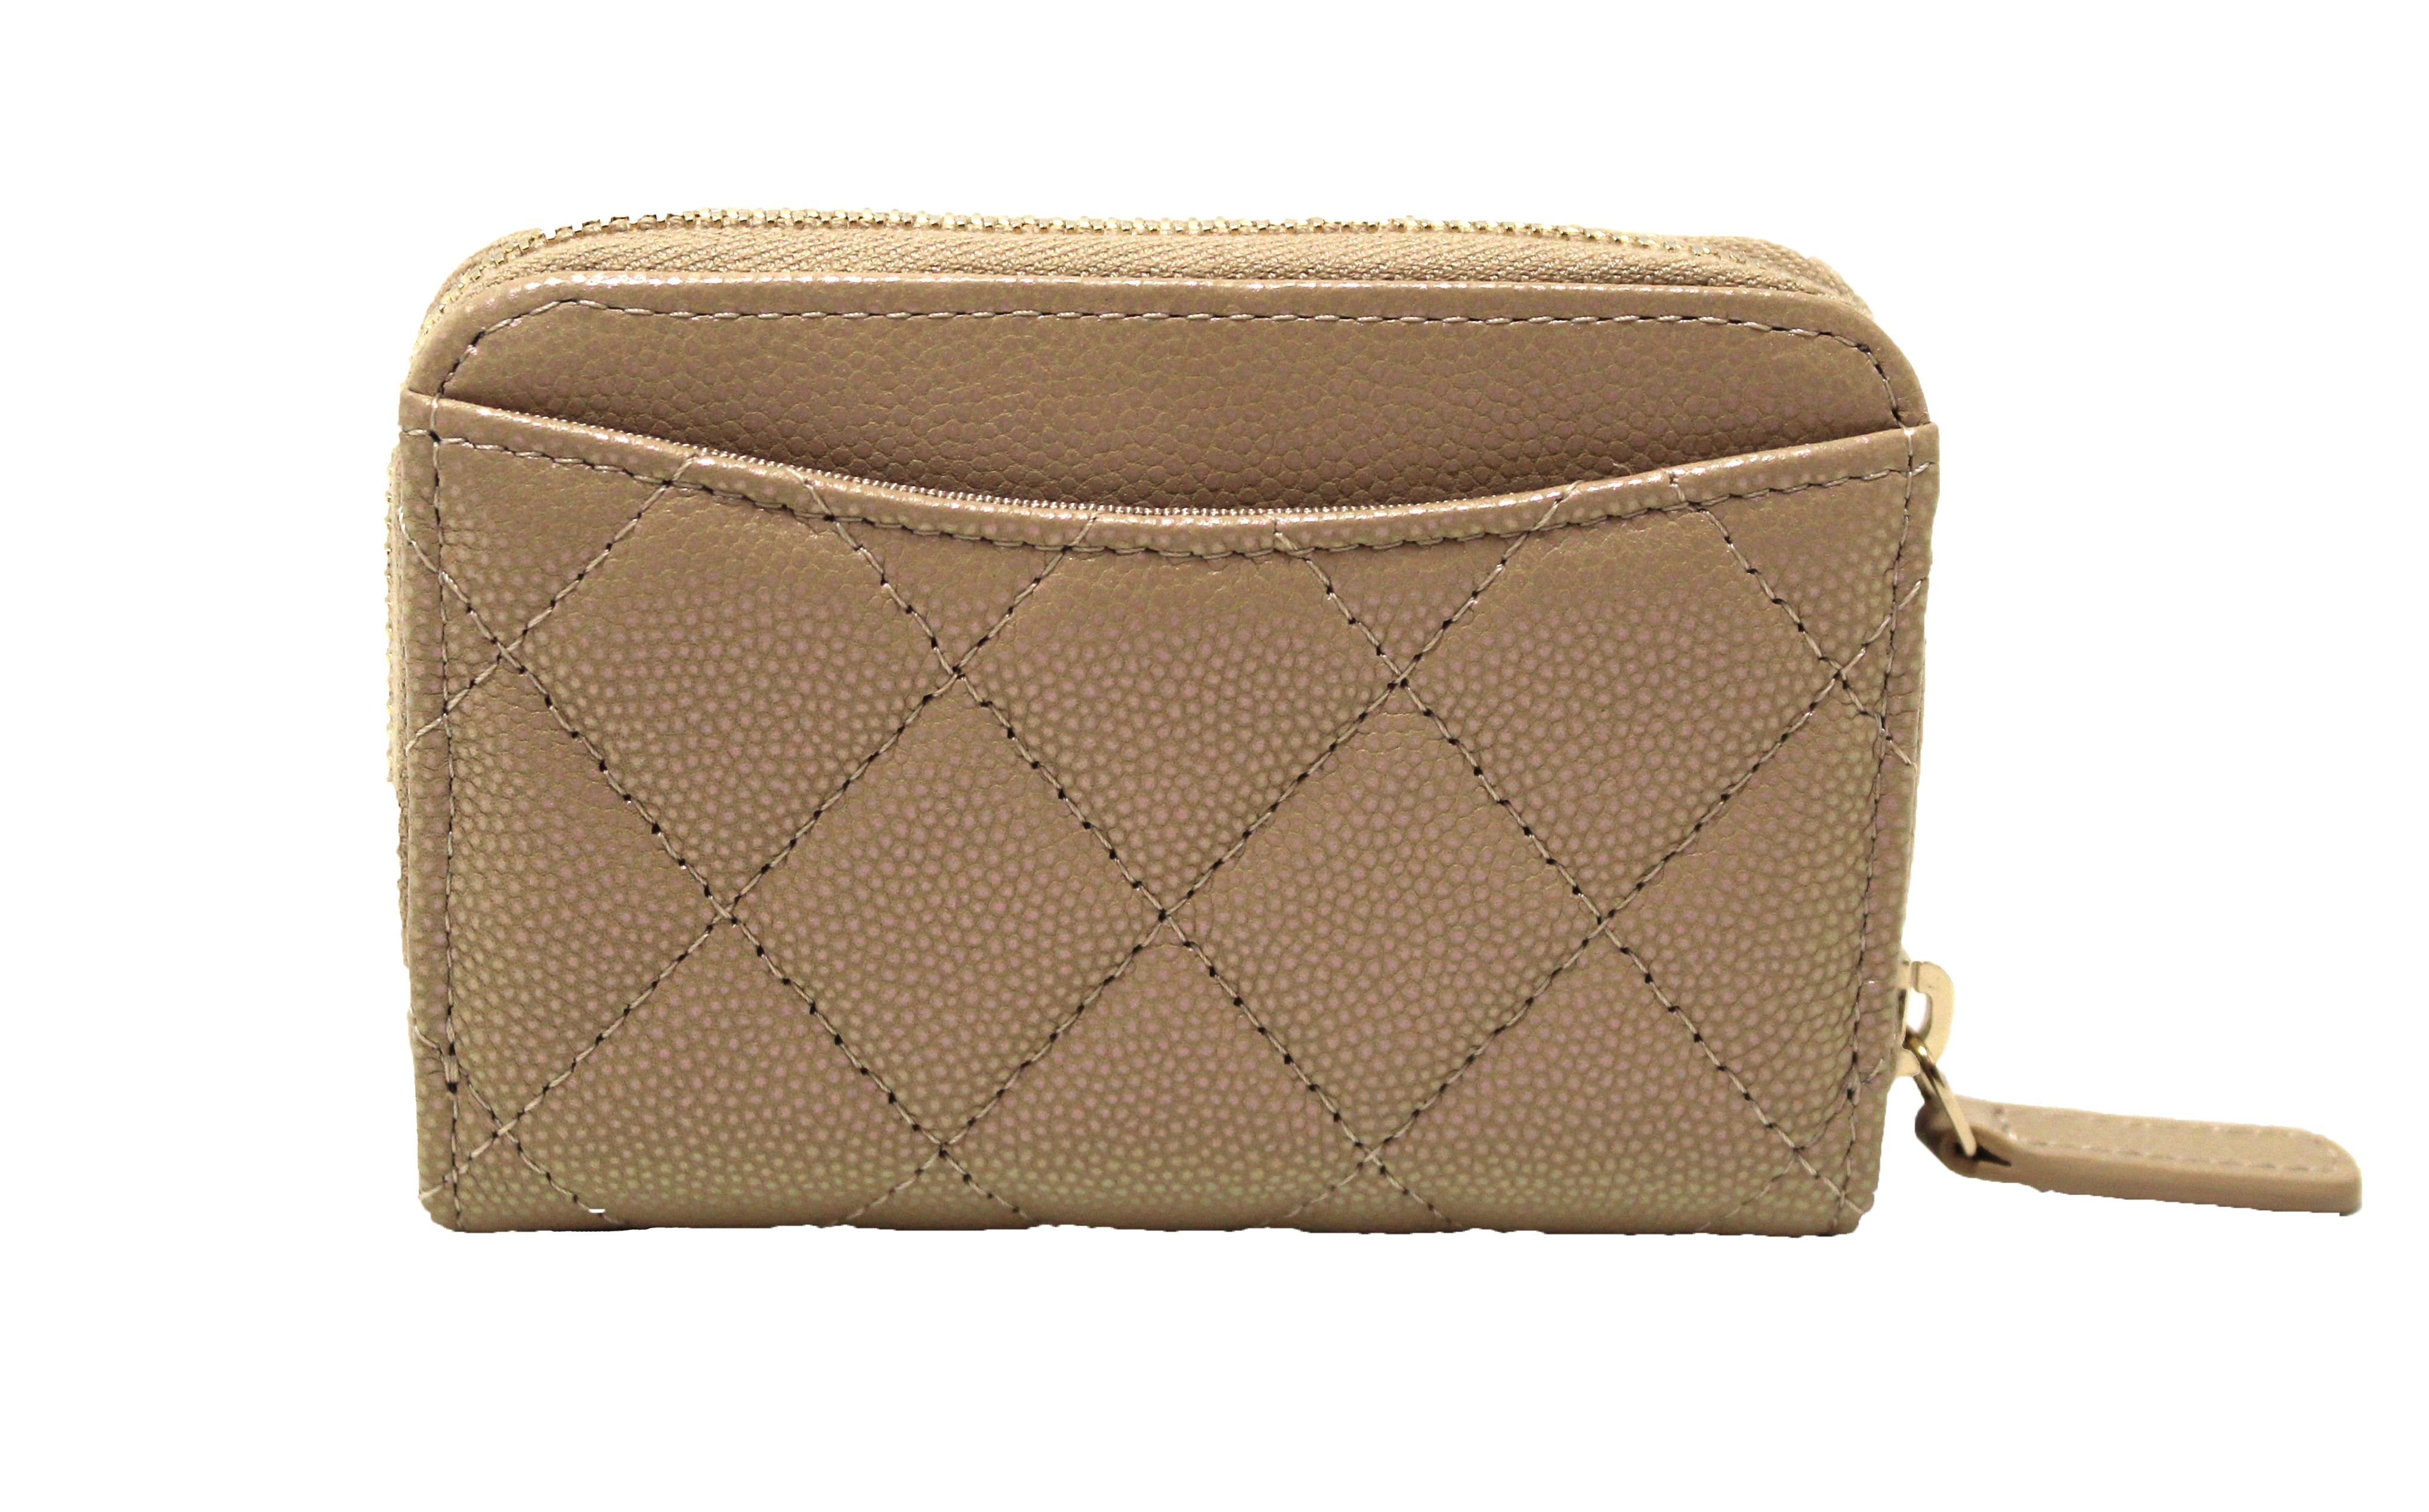 Chanel Classic Zipped Coin Purse Beige